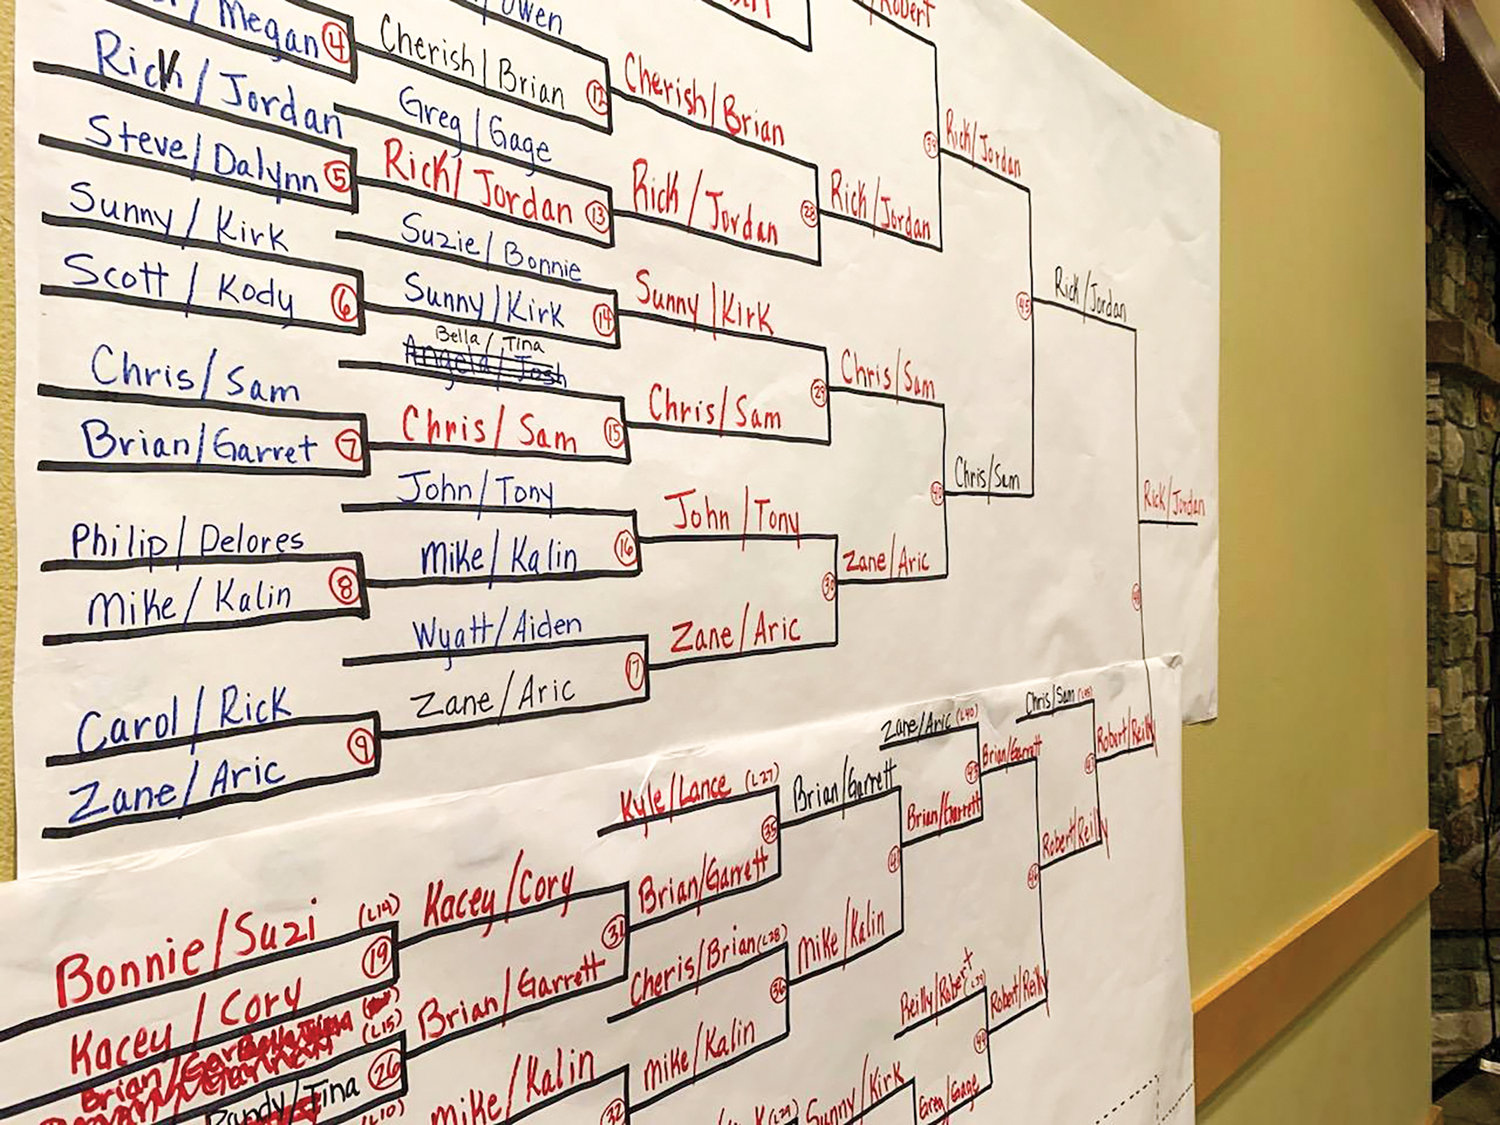 The doubles bracket from Battle Ground's cornhole tournament dubbed the 'Cornament' on Saturday, March 11.